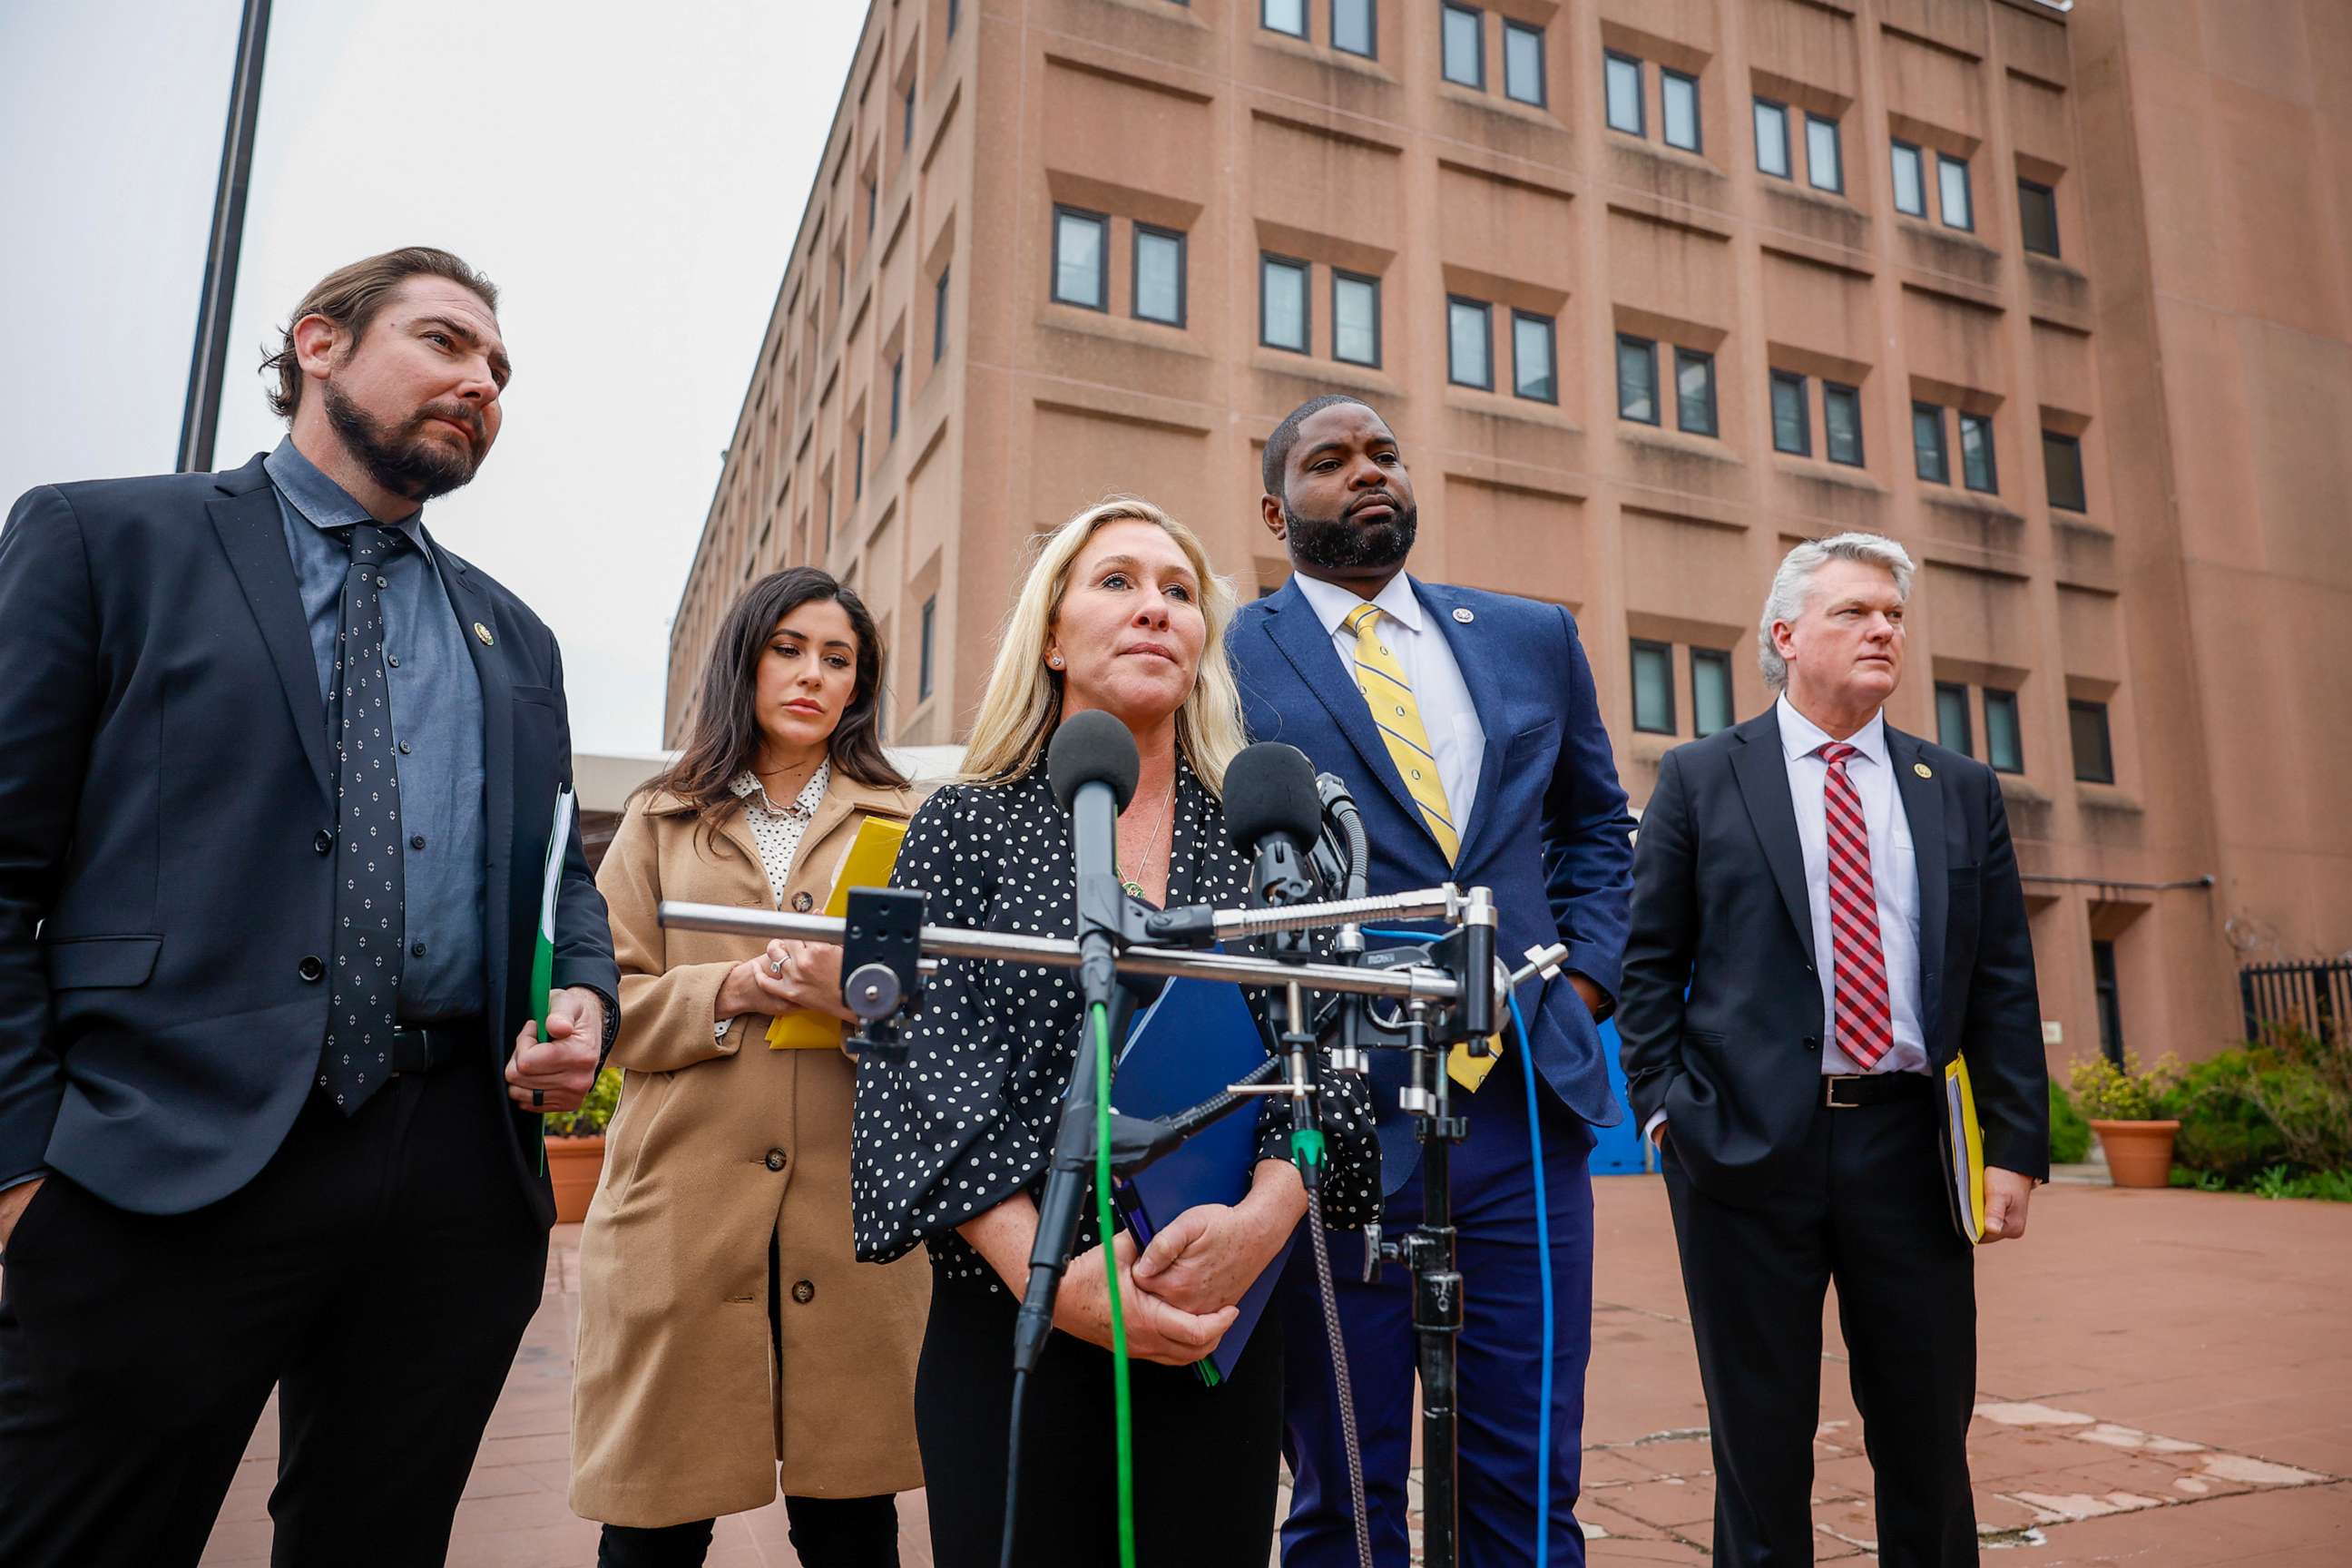 PHOTO: Rep. Marjorie Taylor Greene talks to the media along with Rep. Anna Paulina Luna, Rep. Byron Donalds, and Rep. Mike Collins at the DC Department of Corrections on March 24, 2023, in Washington, D.C.